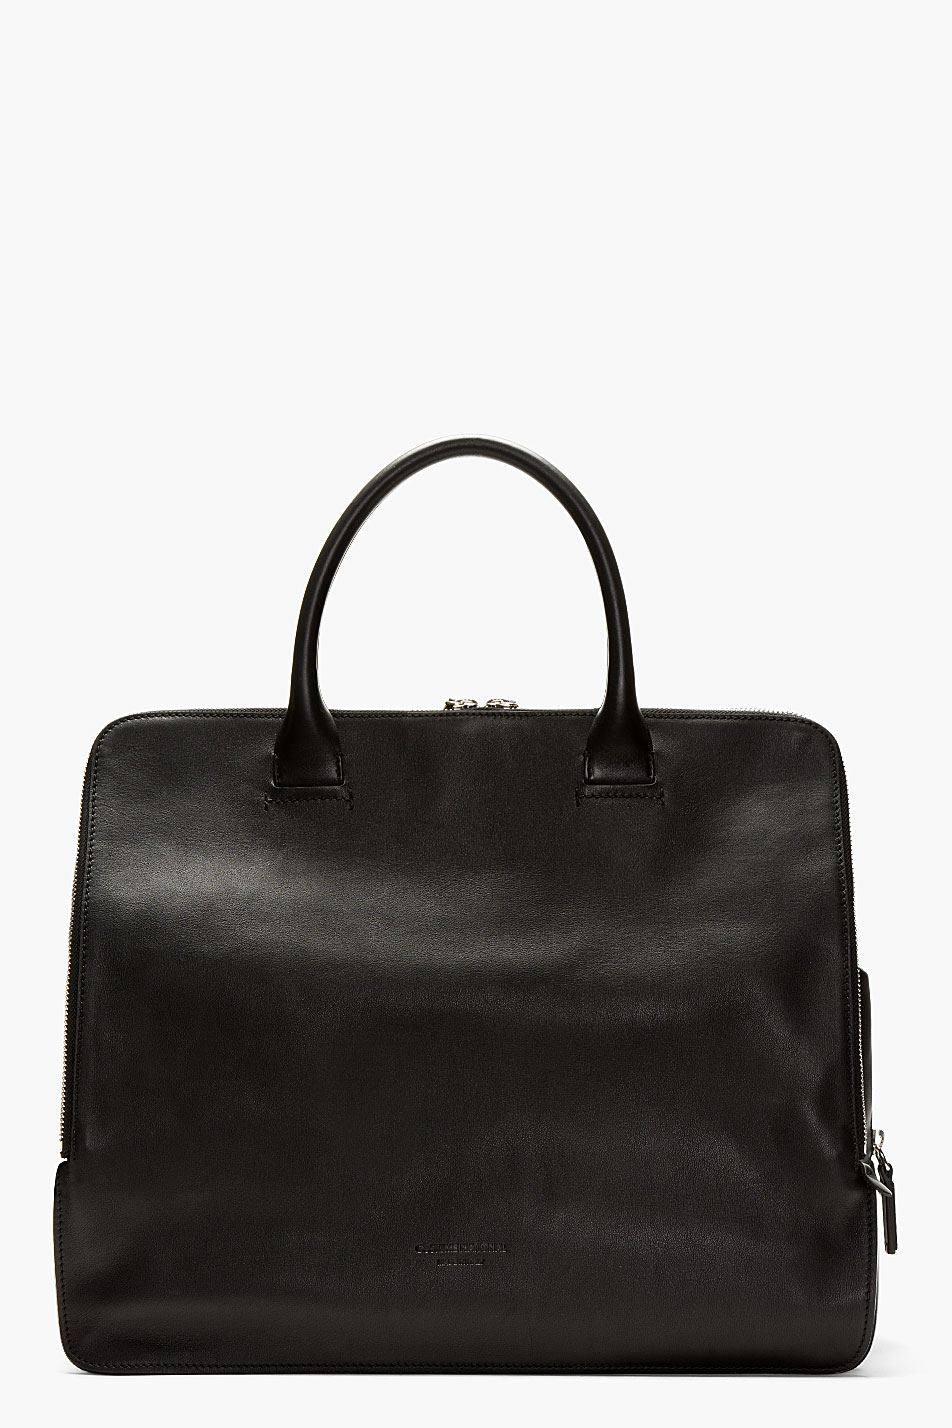 Costume National Black Leather Multi_compartment Duffle Bag in Black ...